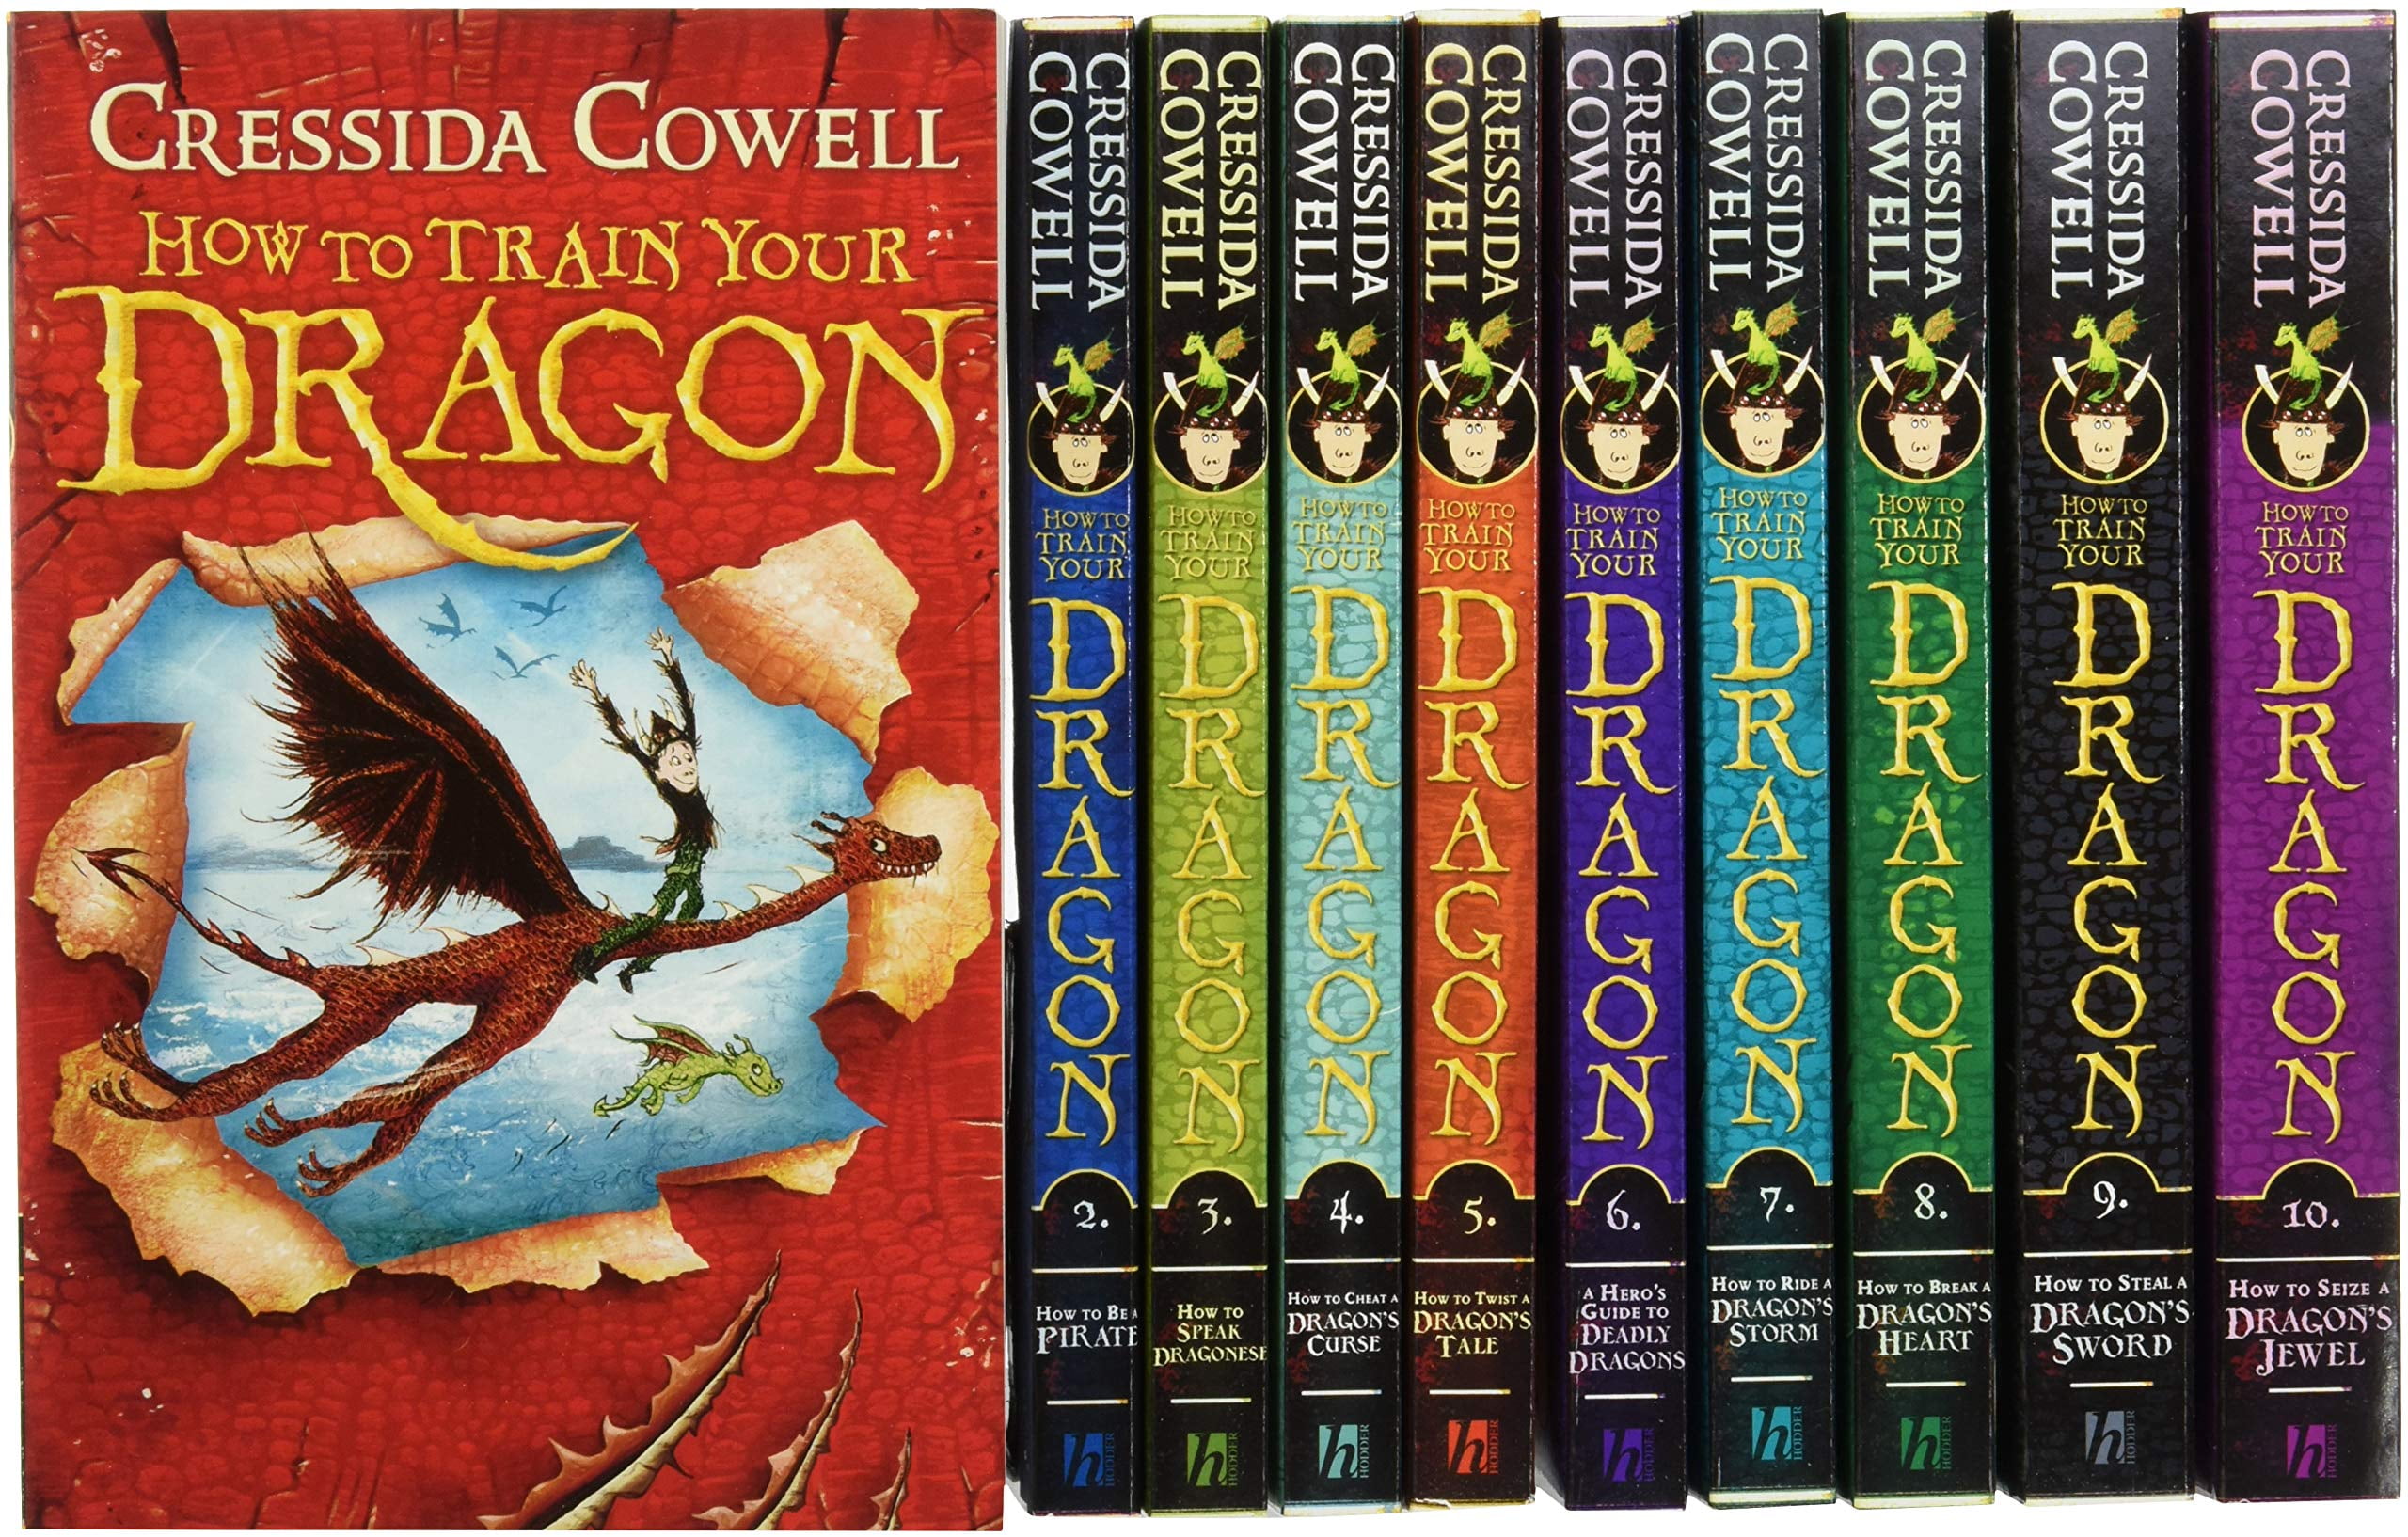 how to train your dragon books in order